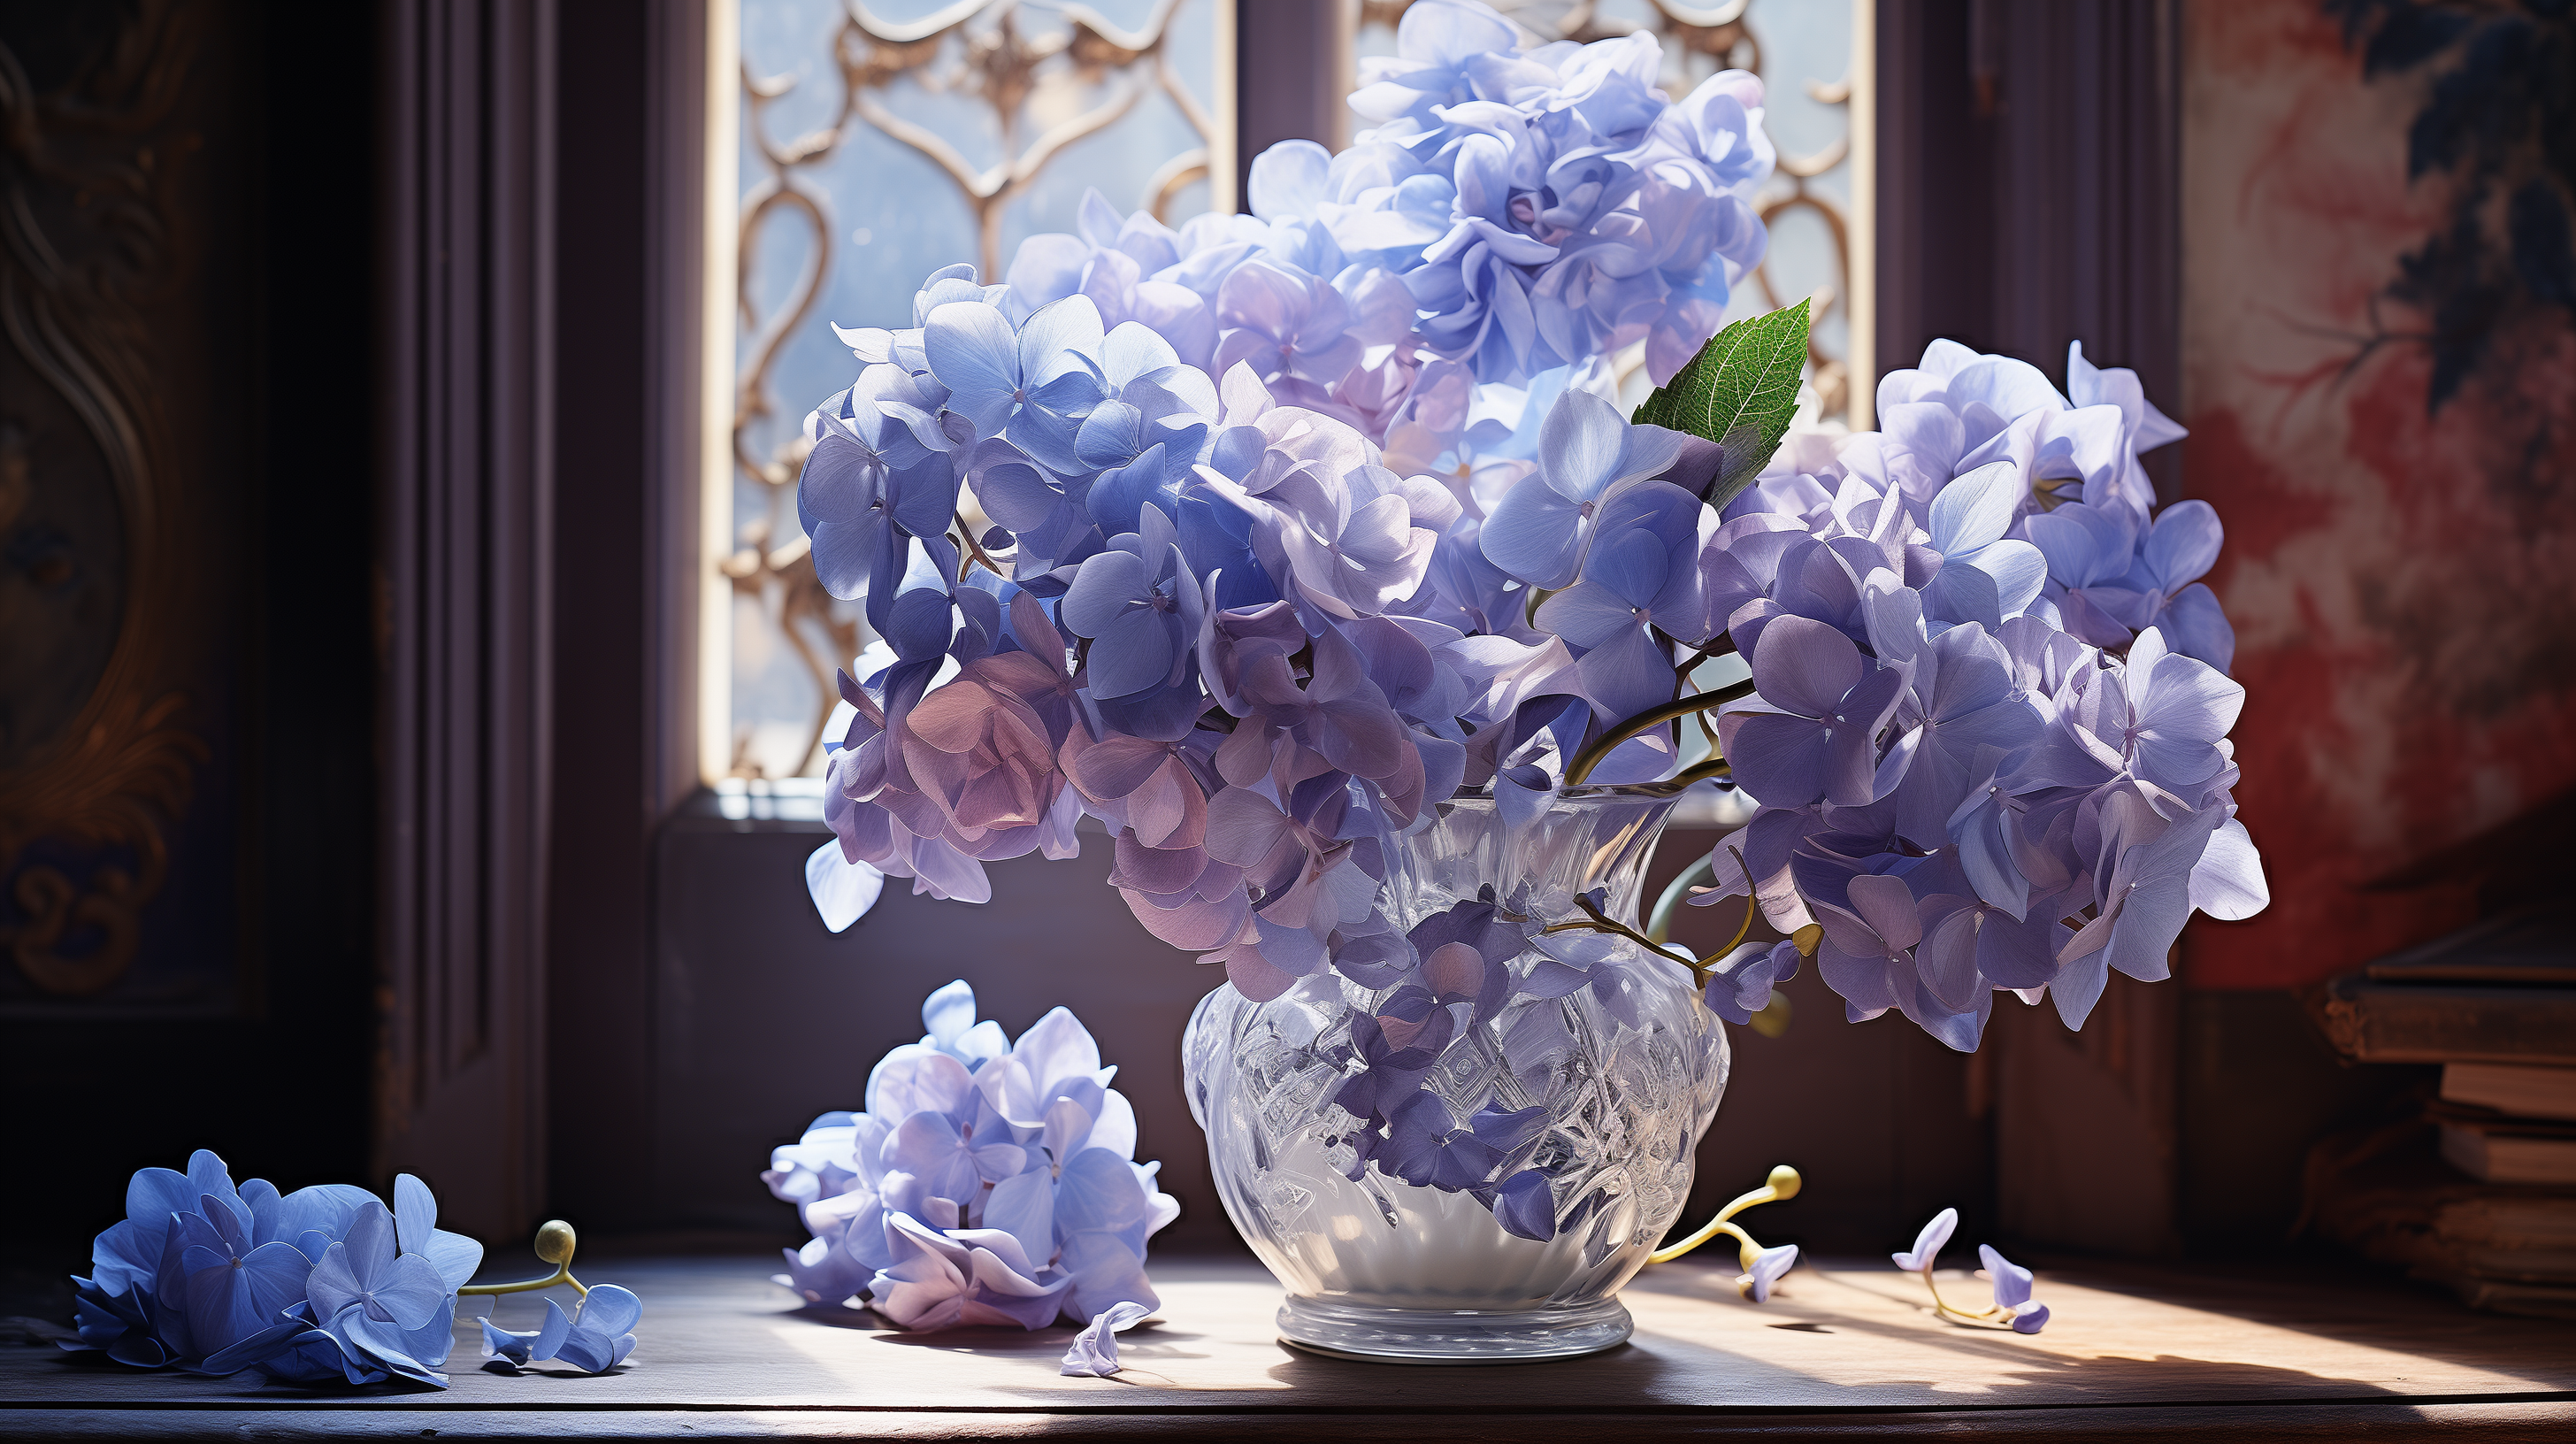 Stunning HD desktop wallpaper featuring blue hydrangea flowers in a clear vase with natural light by a window.